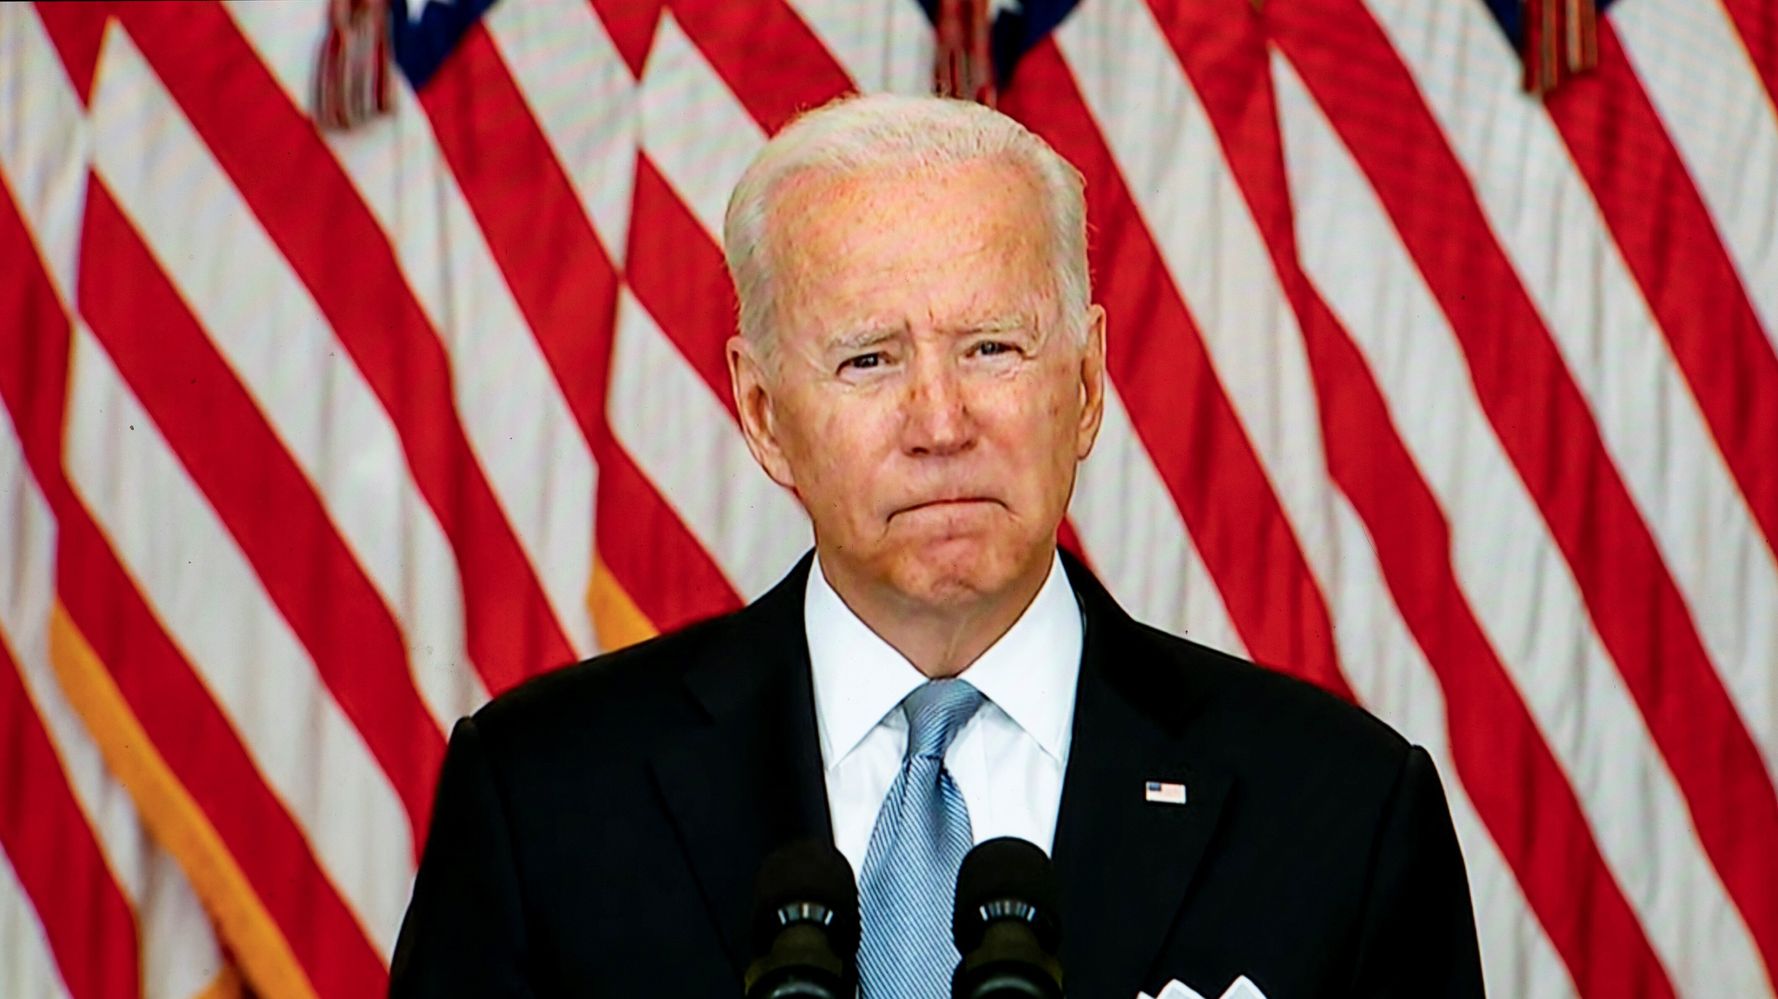 Biden Faces Mounting Pressure To Yank Line 3 Oil Pipeline Permits